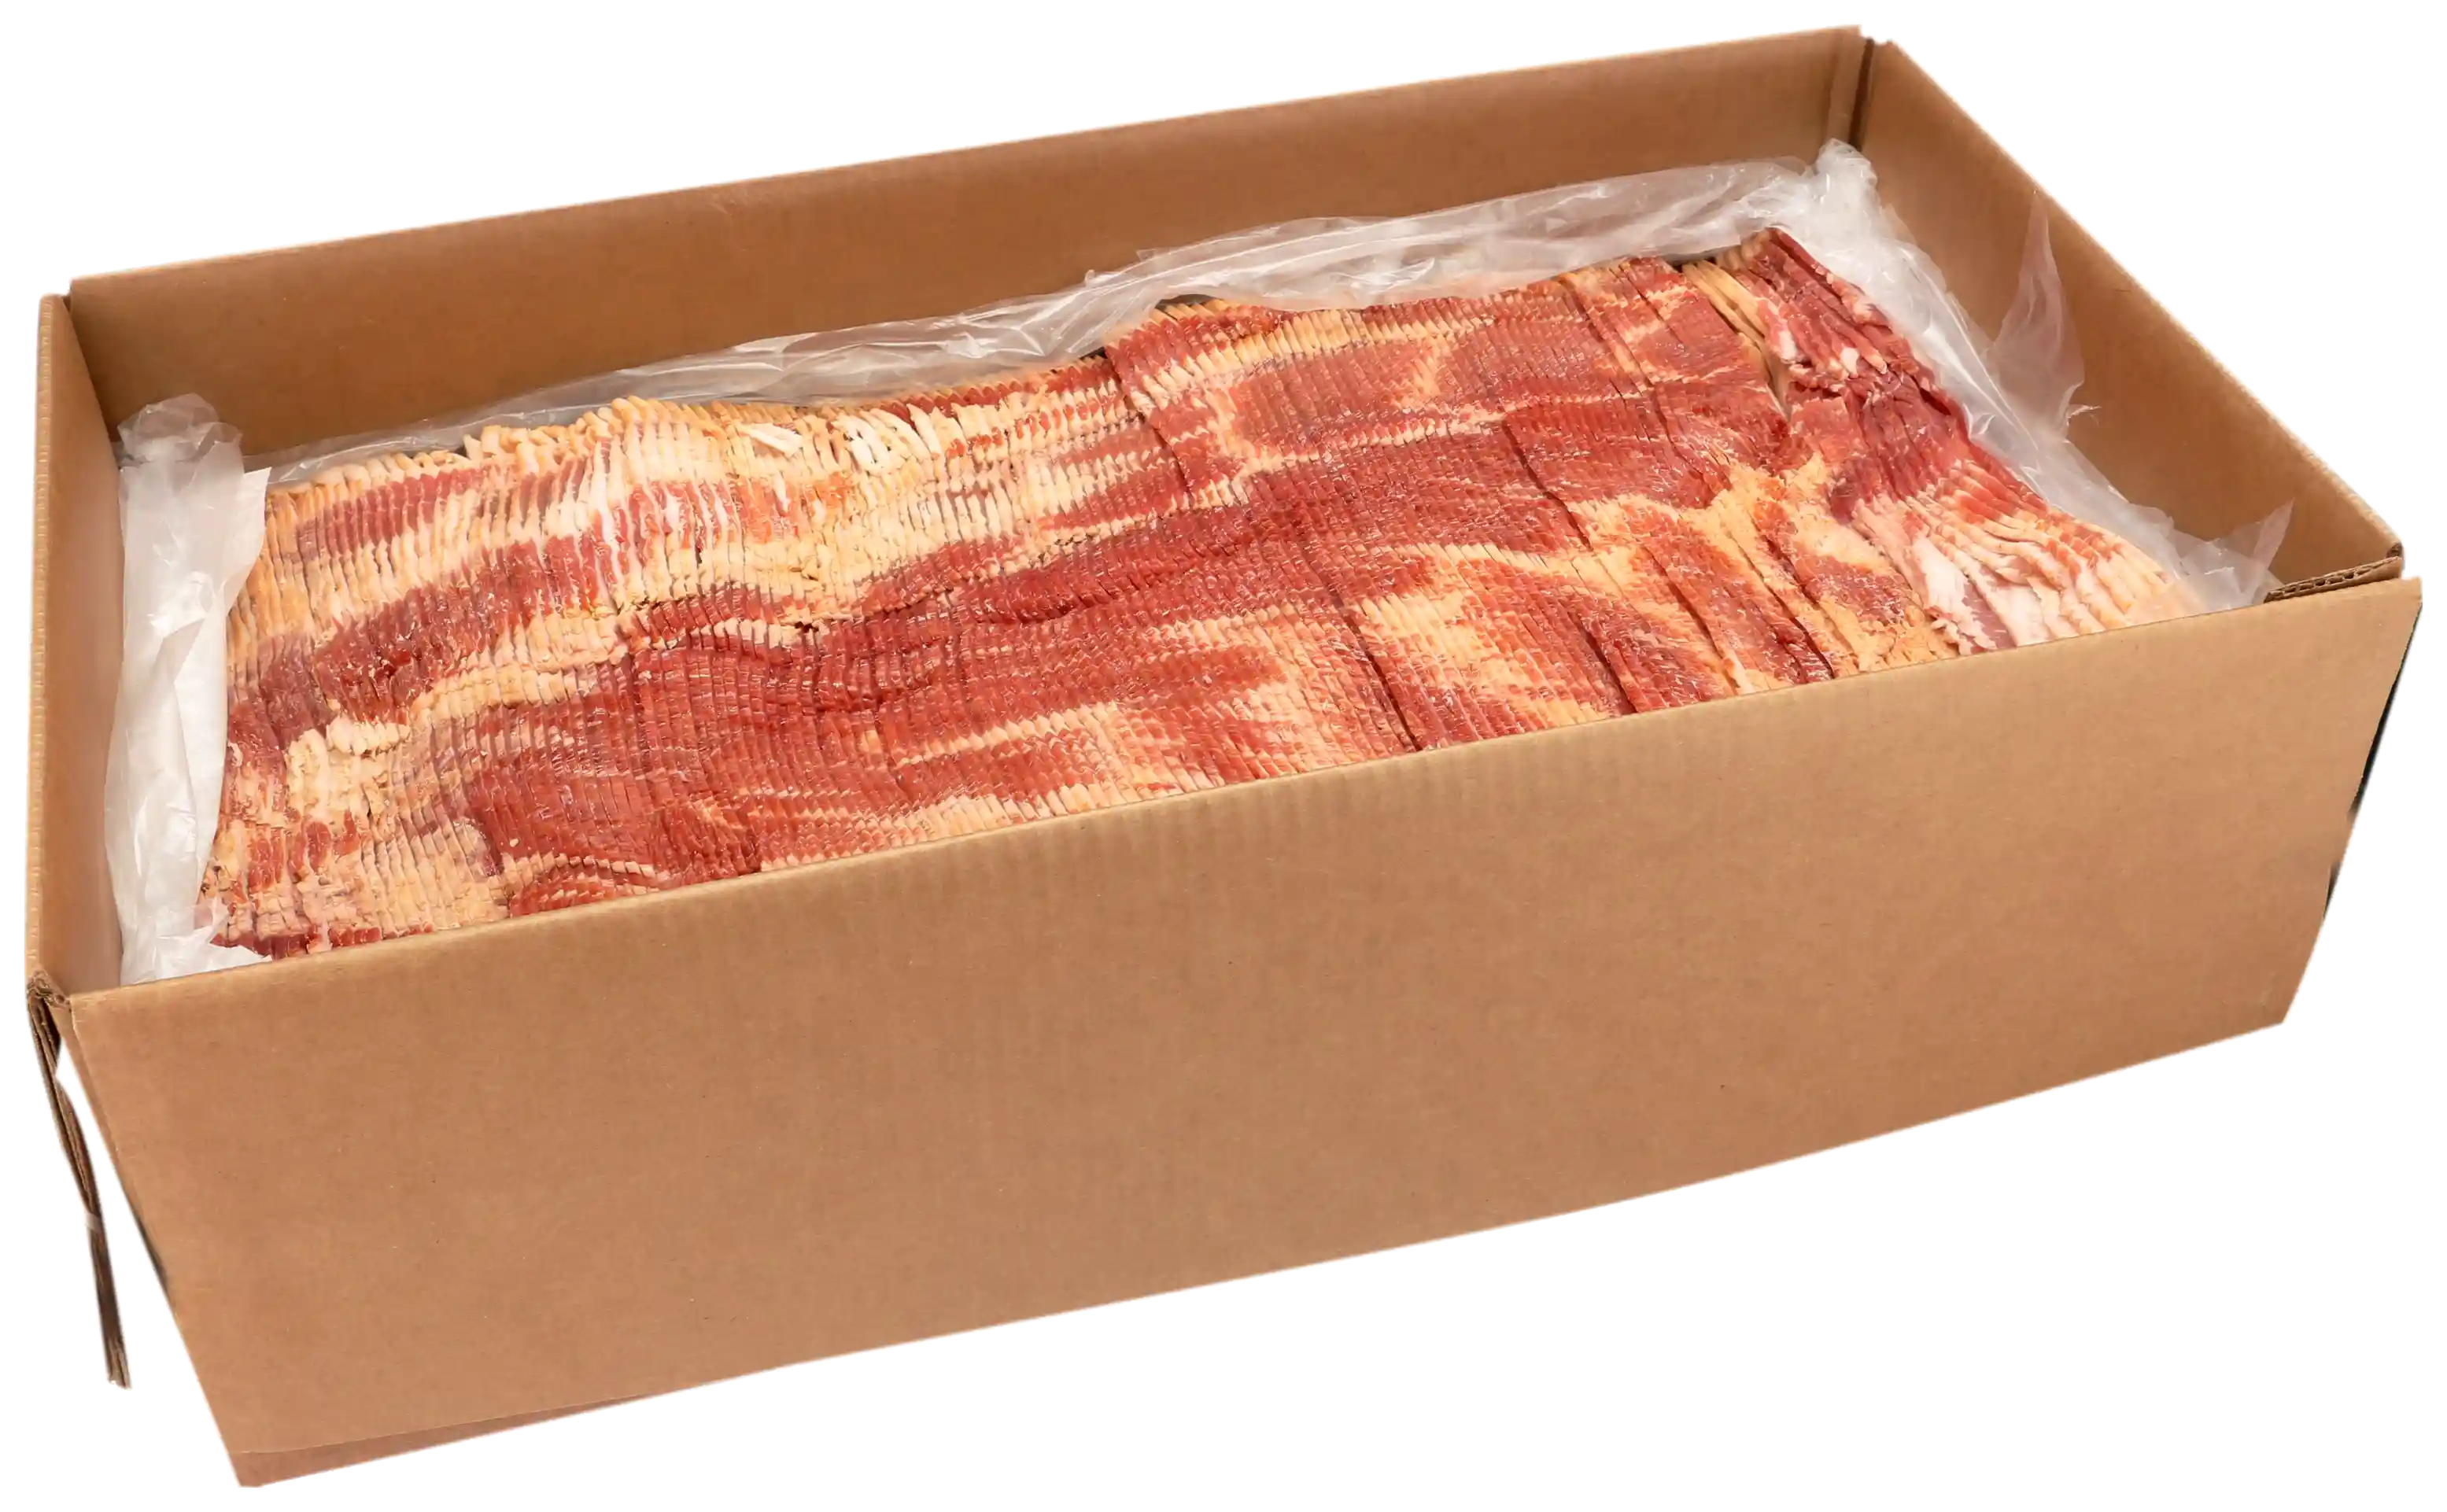 Wright® Brand Naturally Hickory Smoked Regular Sliced Bacon, Bulk, 15 Lbs, 10-14 Slices per Pound, Frozen_image_31